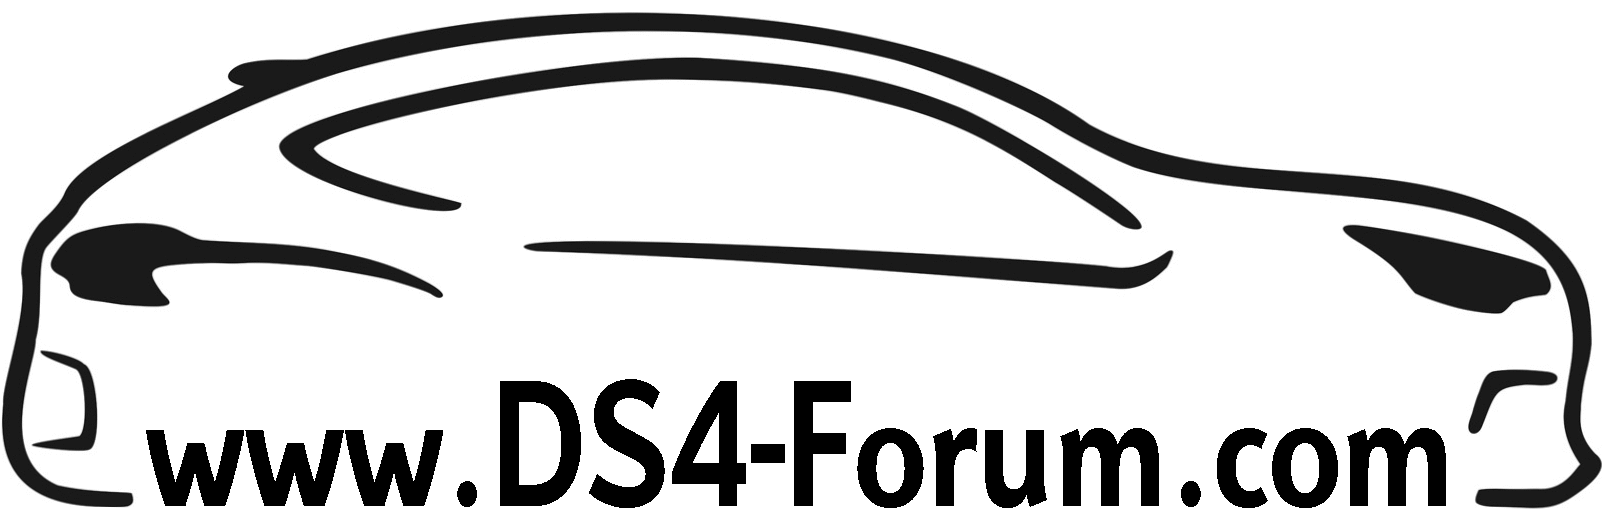 ds4-forum-logo5.png